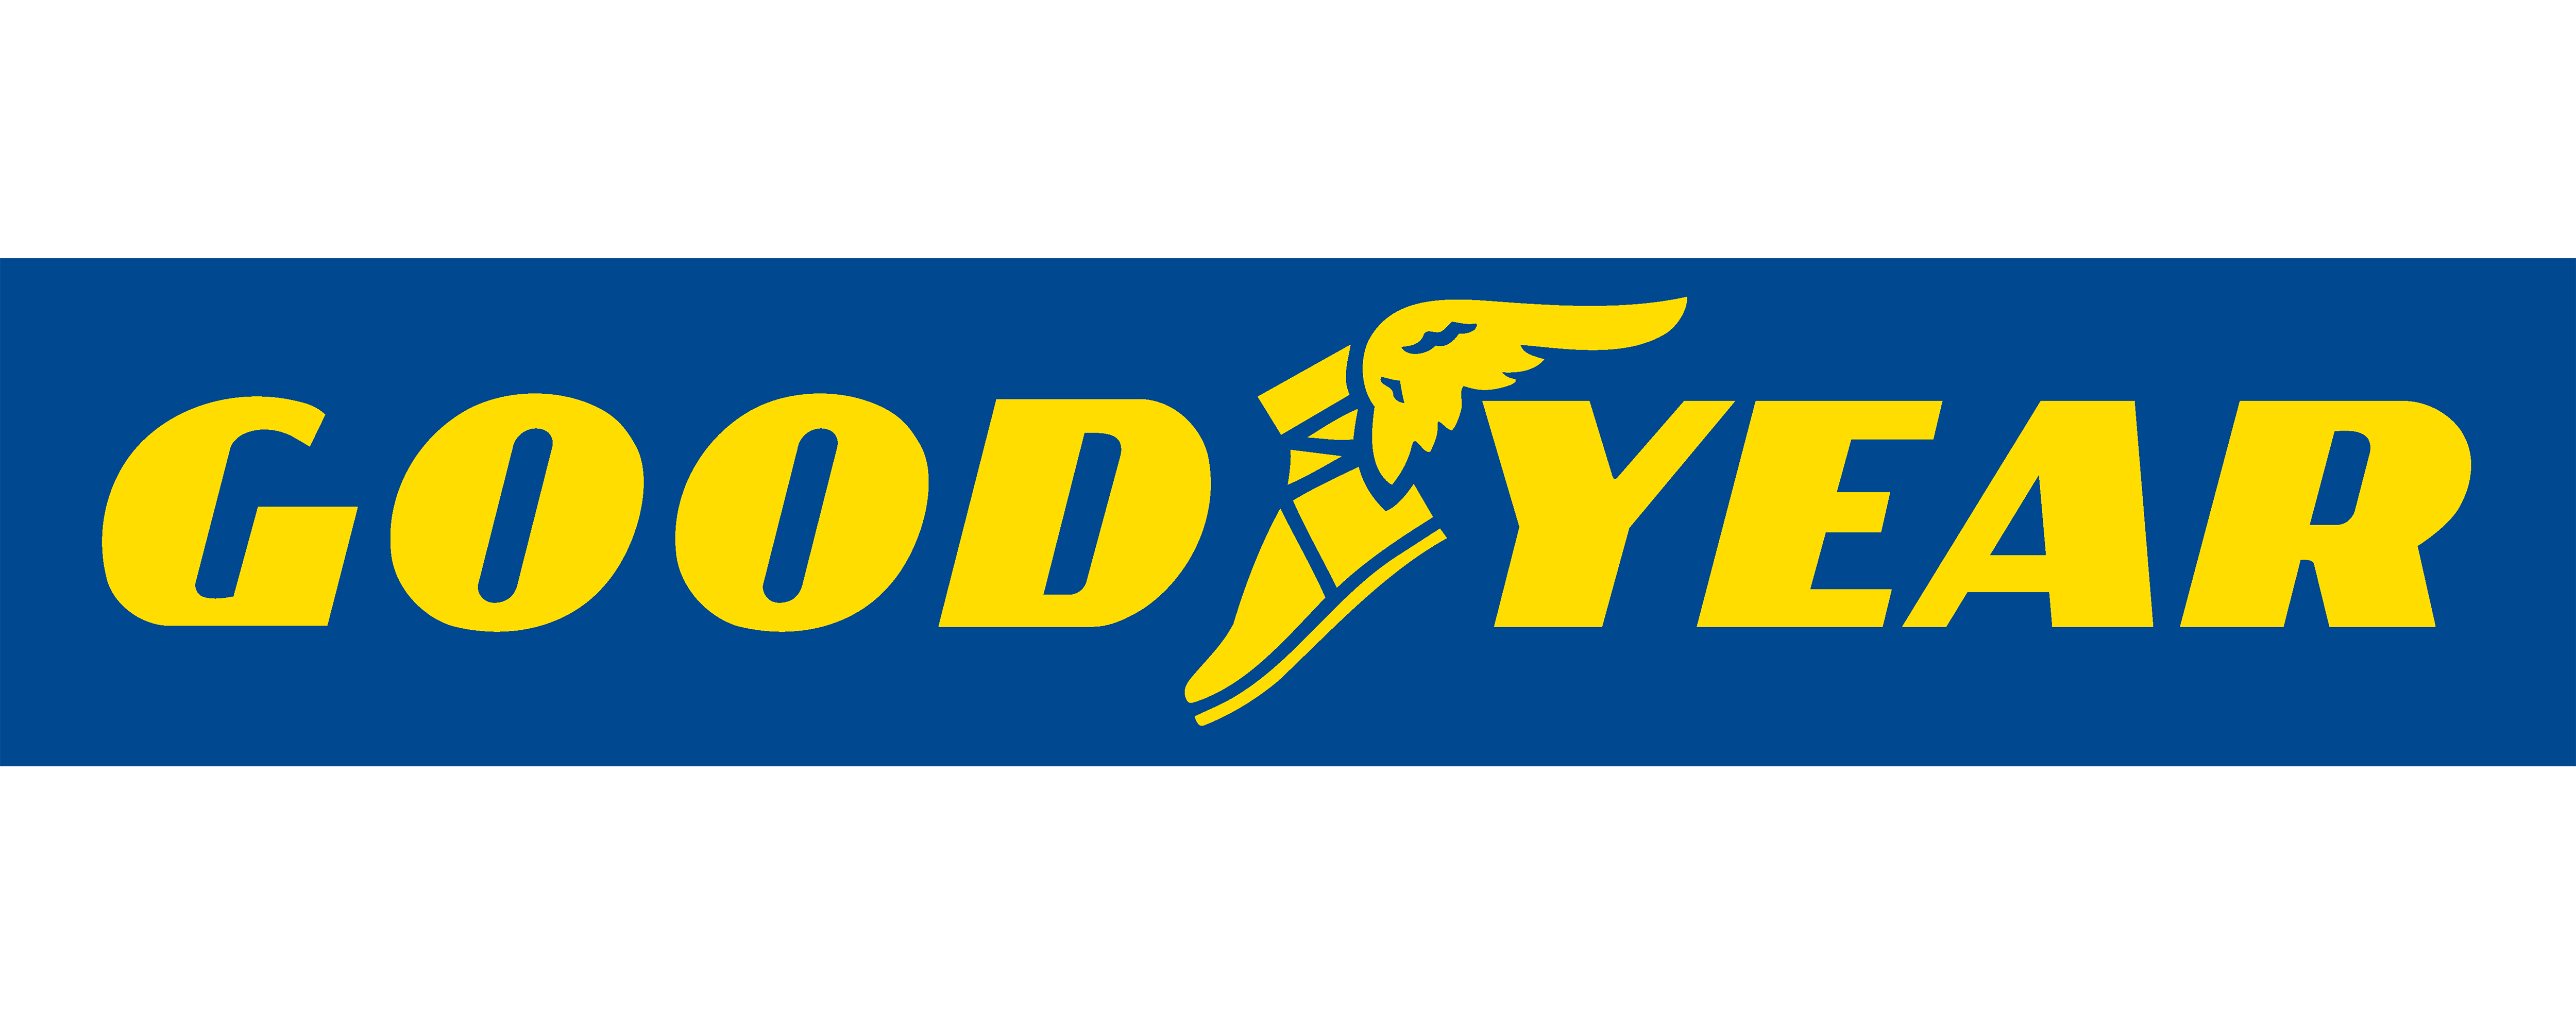 Goodyear.png